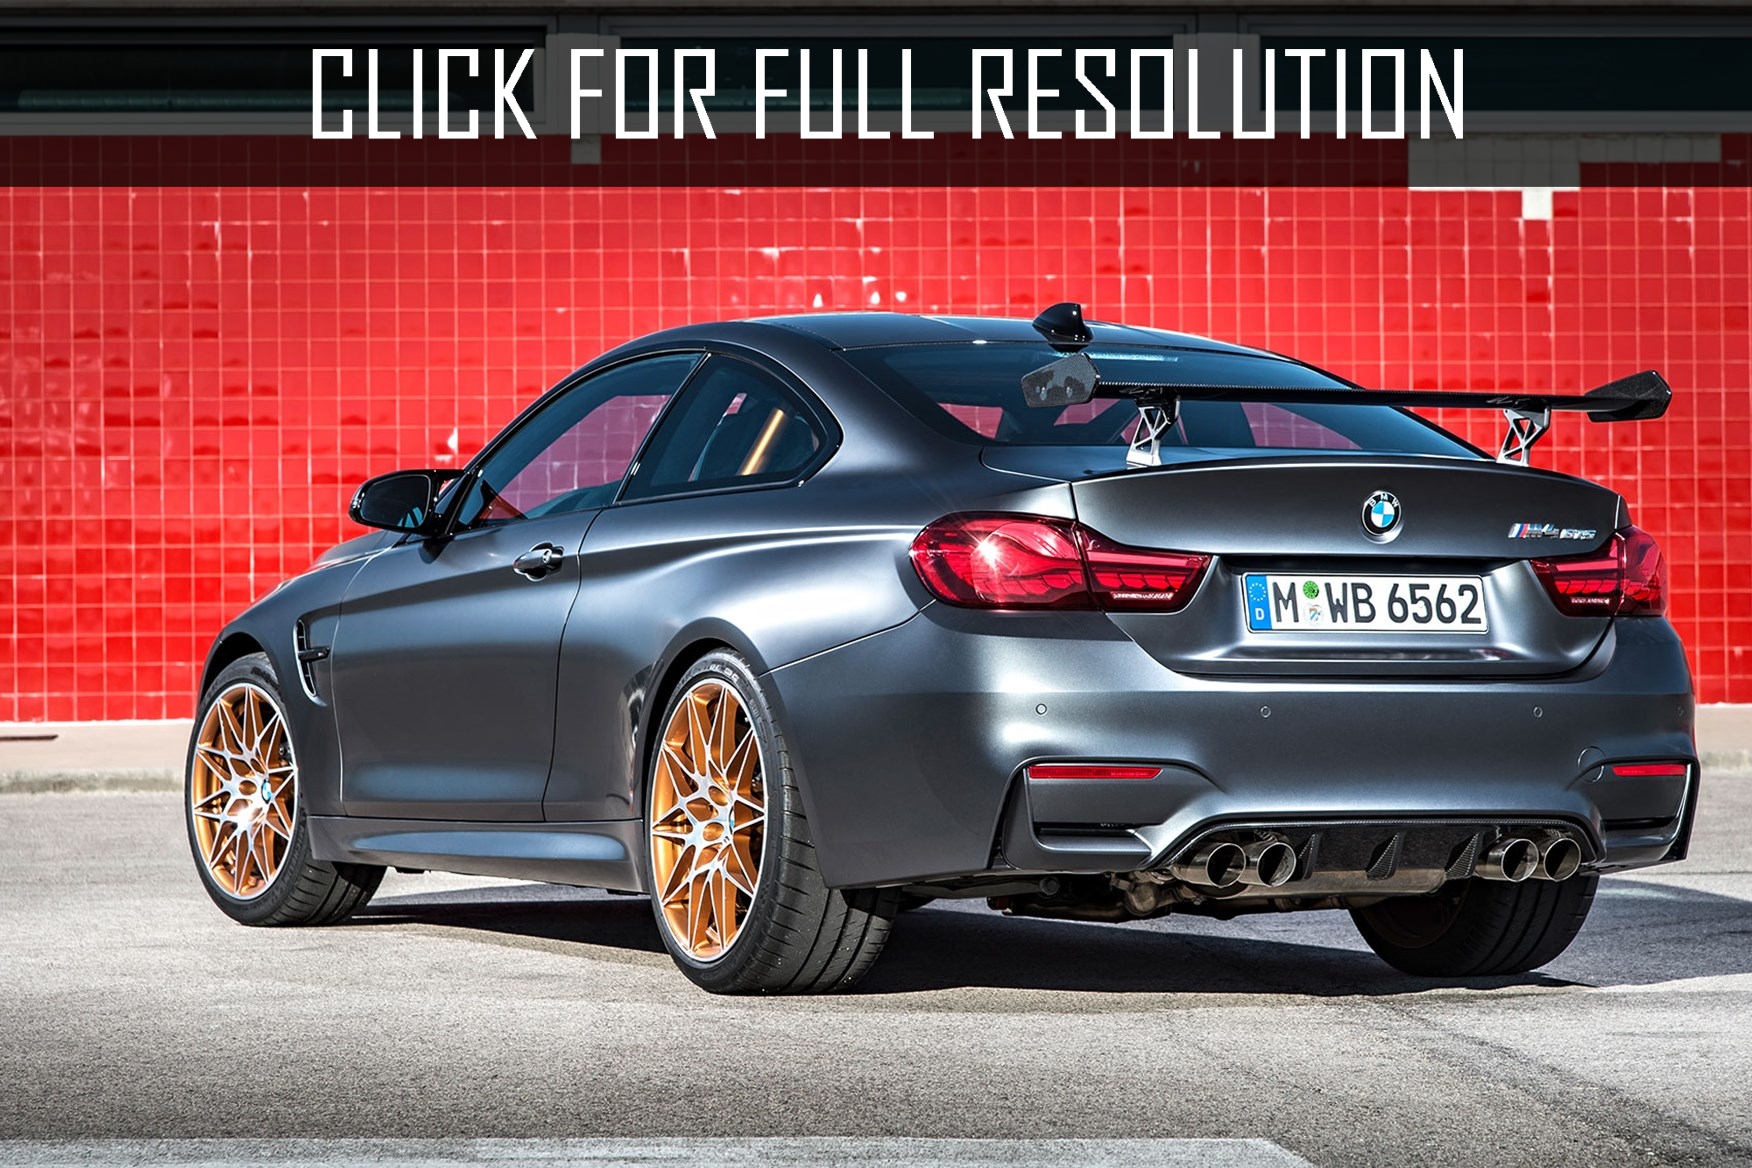 2016 Bmw M3 Gtr news, reviews, msrp, ratings with